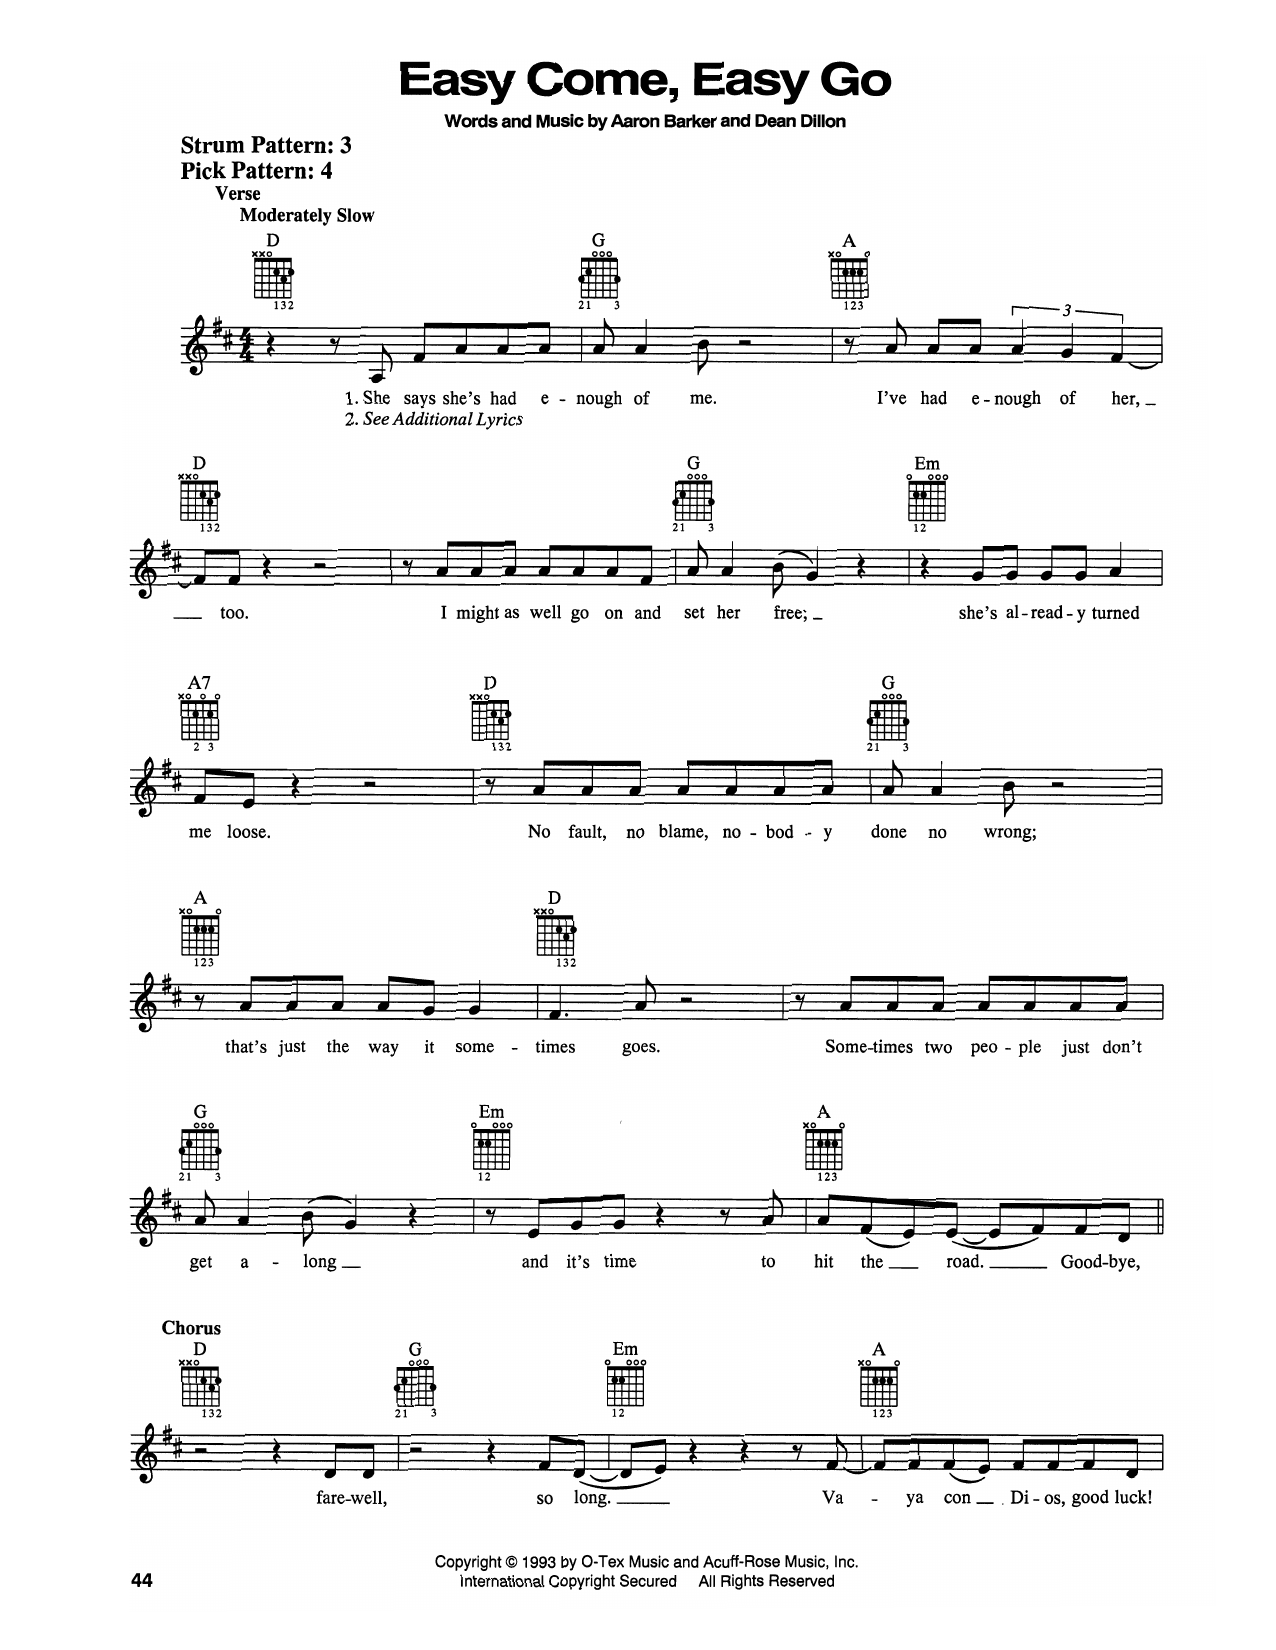 George Strait Easy Come, Easy Go sheet music notes printable PDF score